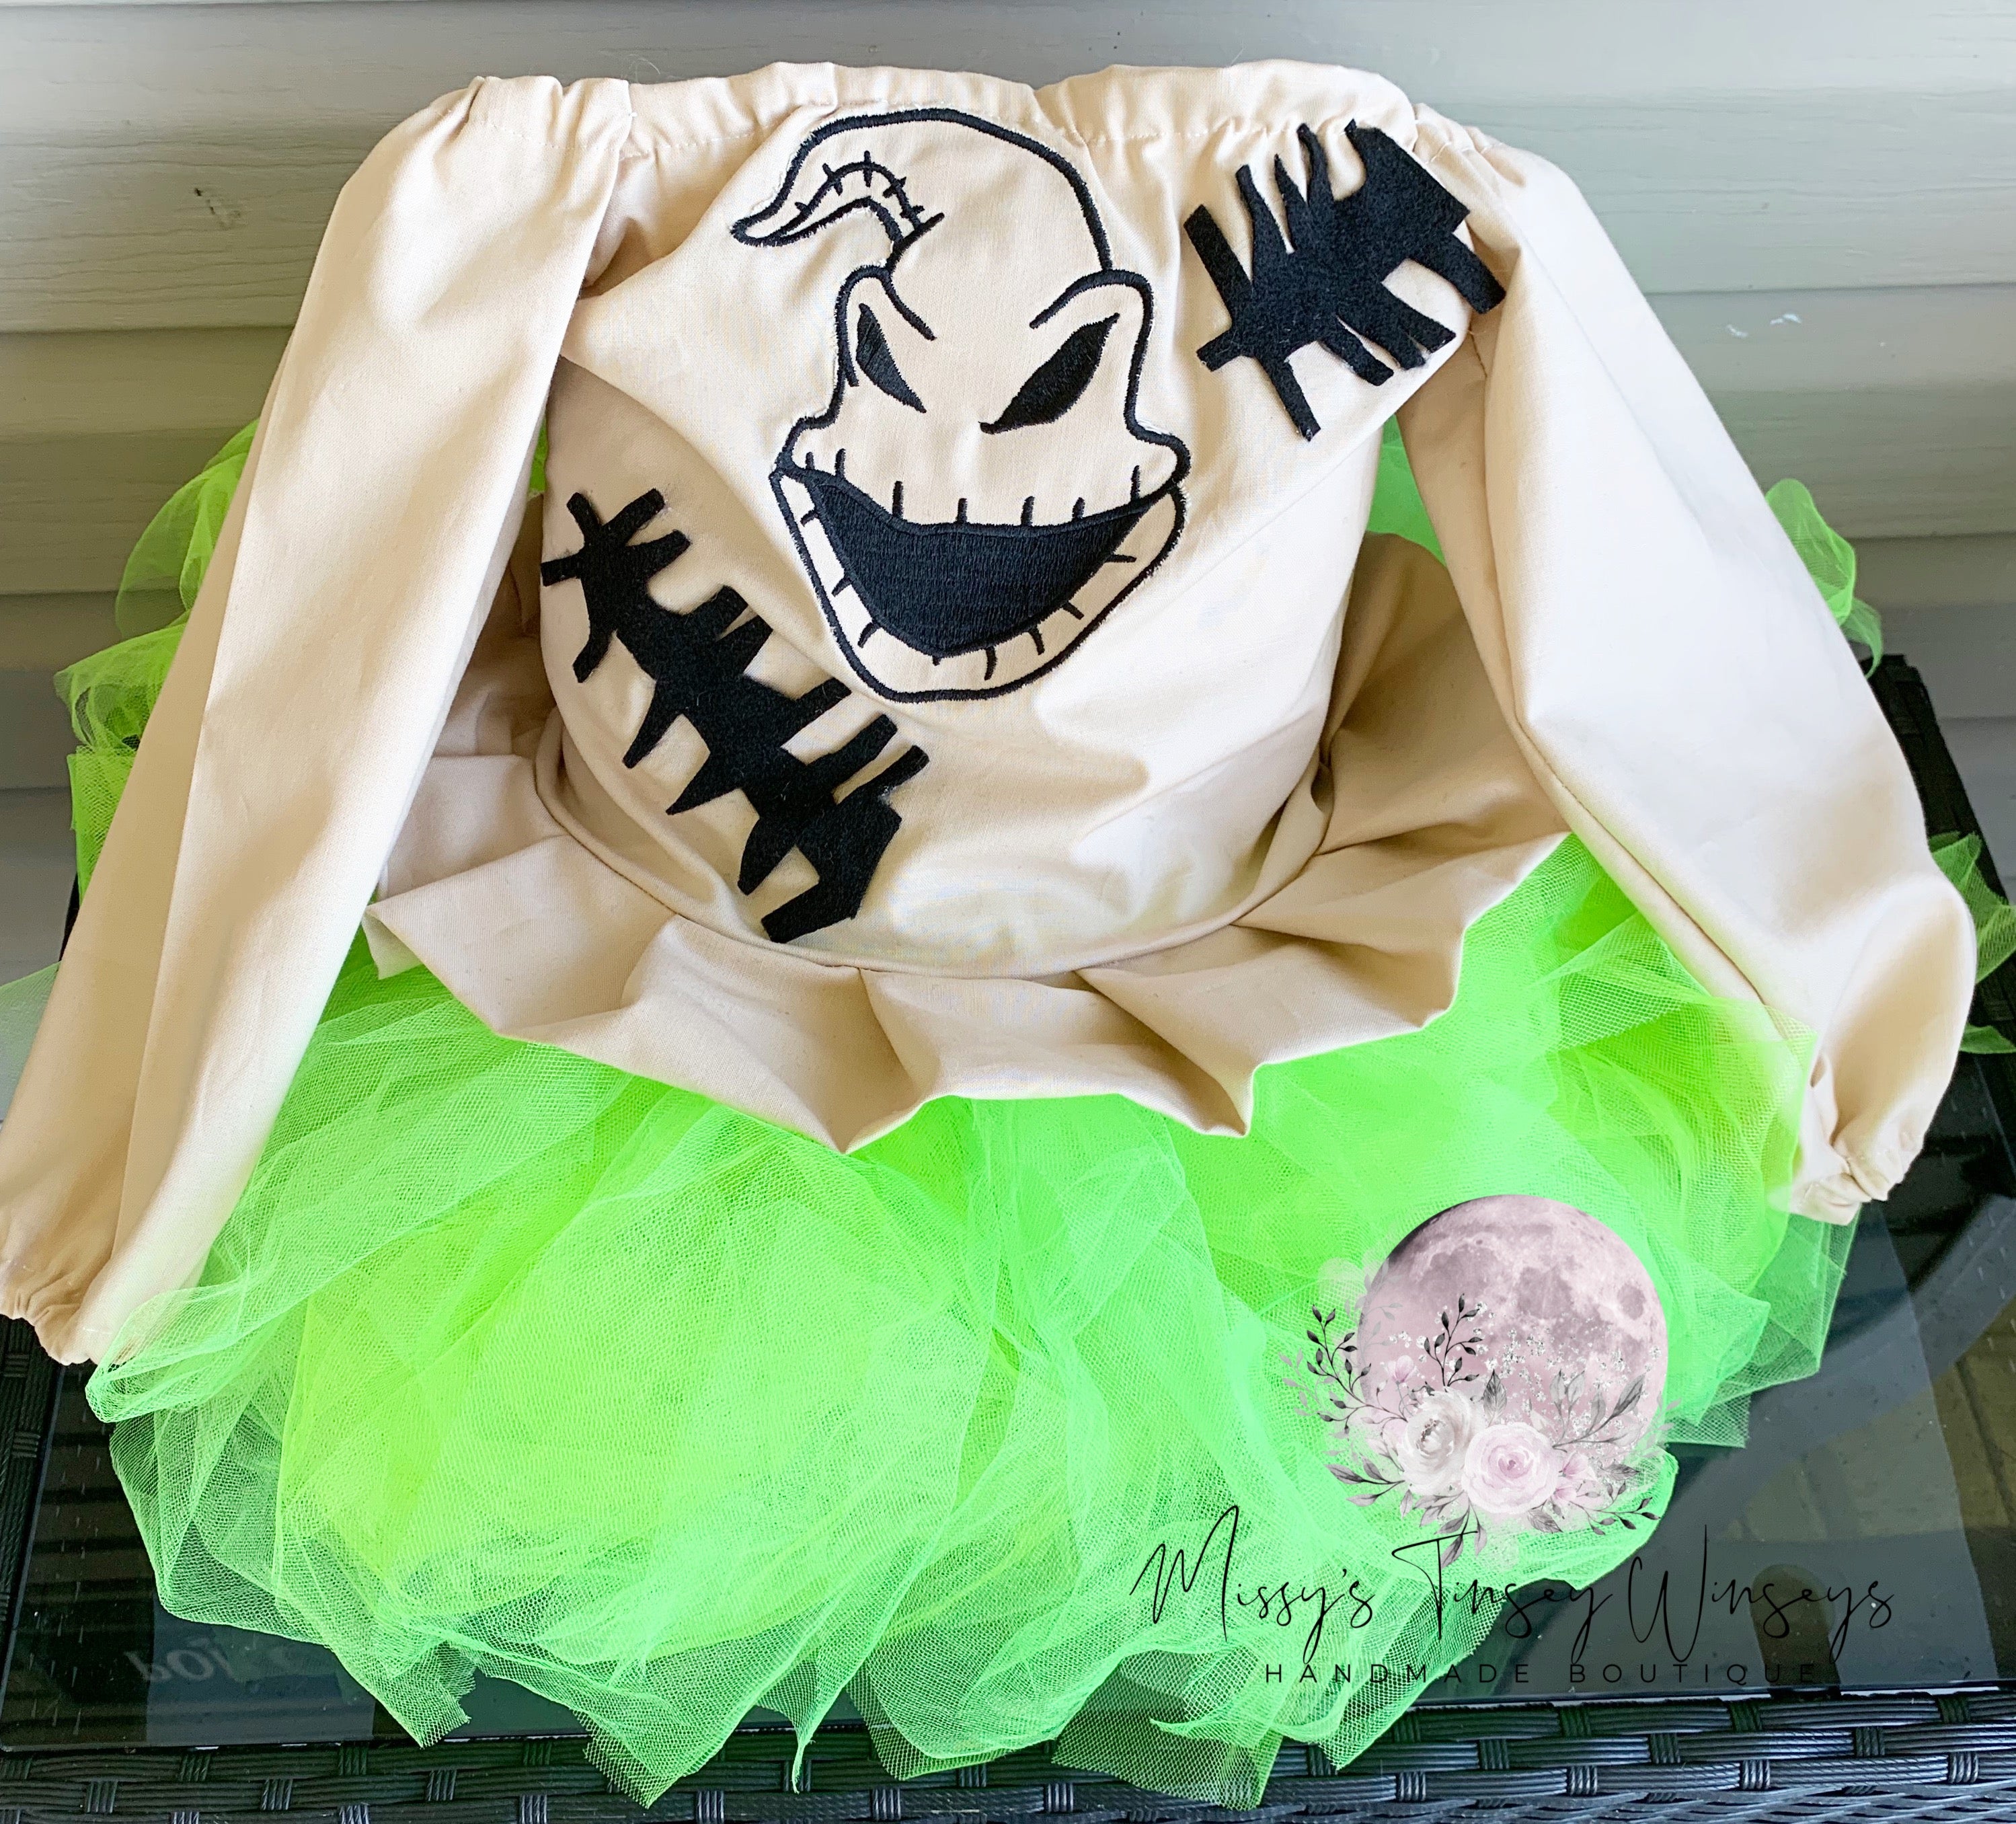 Oogie Boogie Costume – Missy's Tinsey Winseys